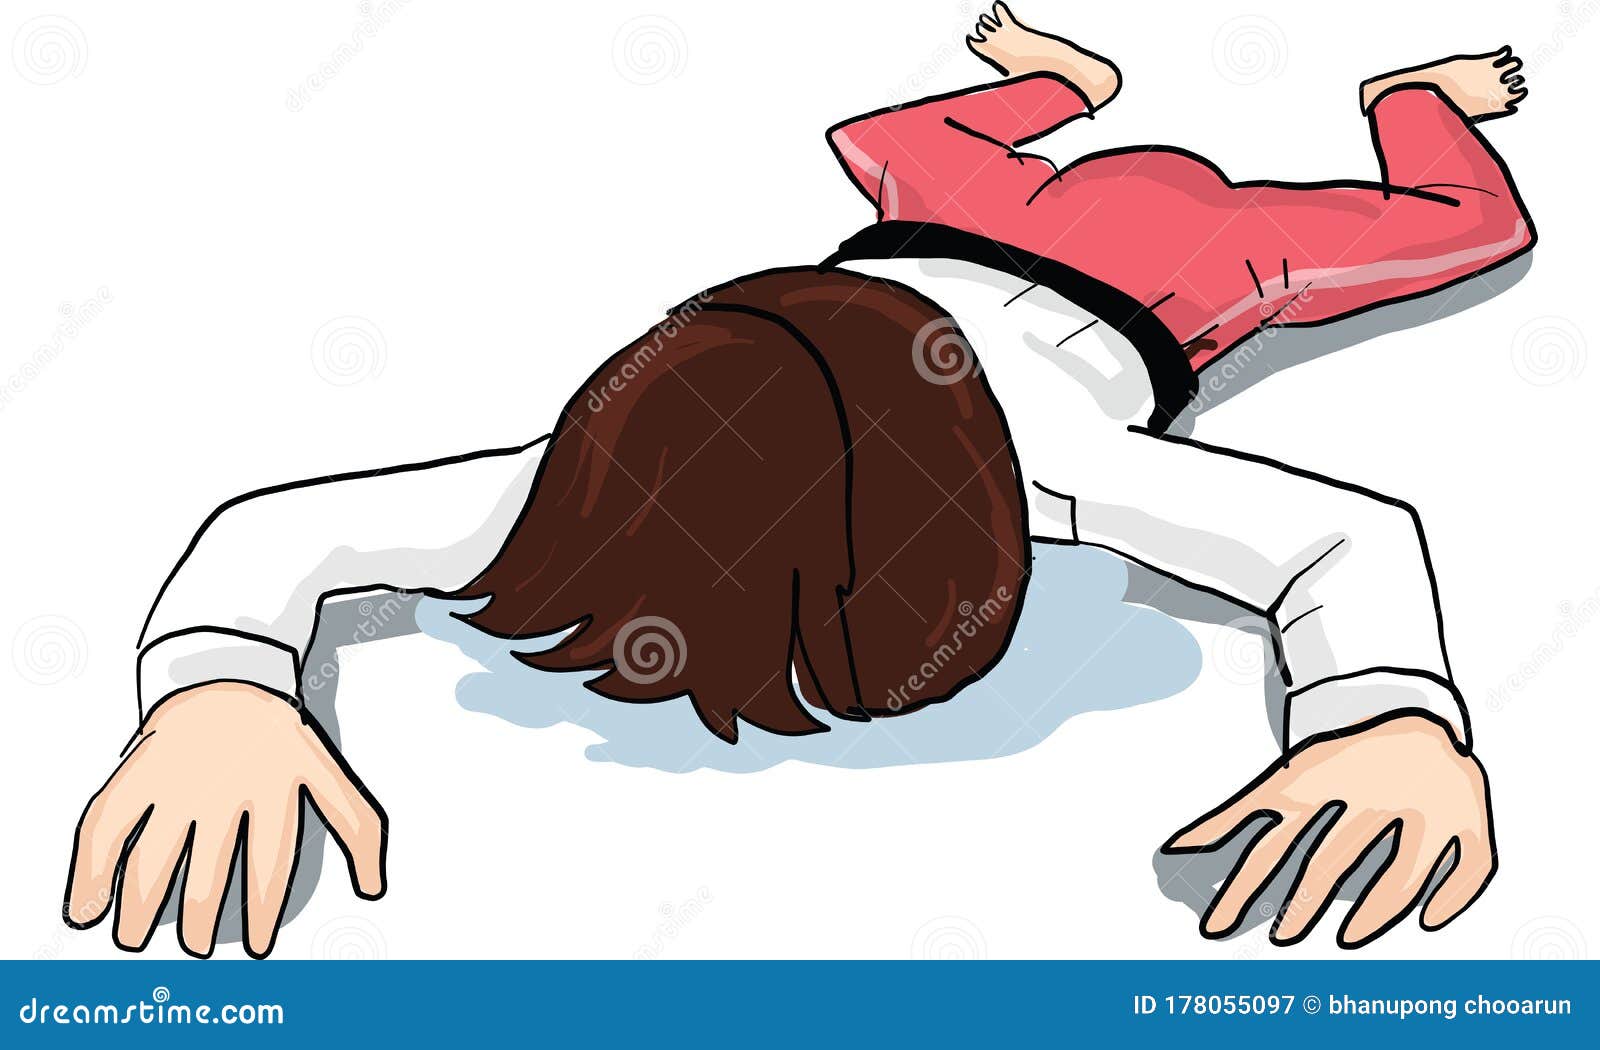 Cartoon Of Man In White Suit Action Lay Down On The Floor Stock Vector Illustration Of Glass Figure